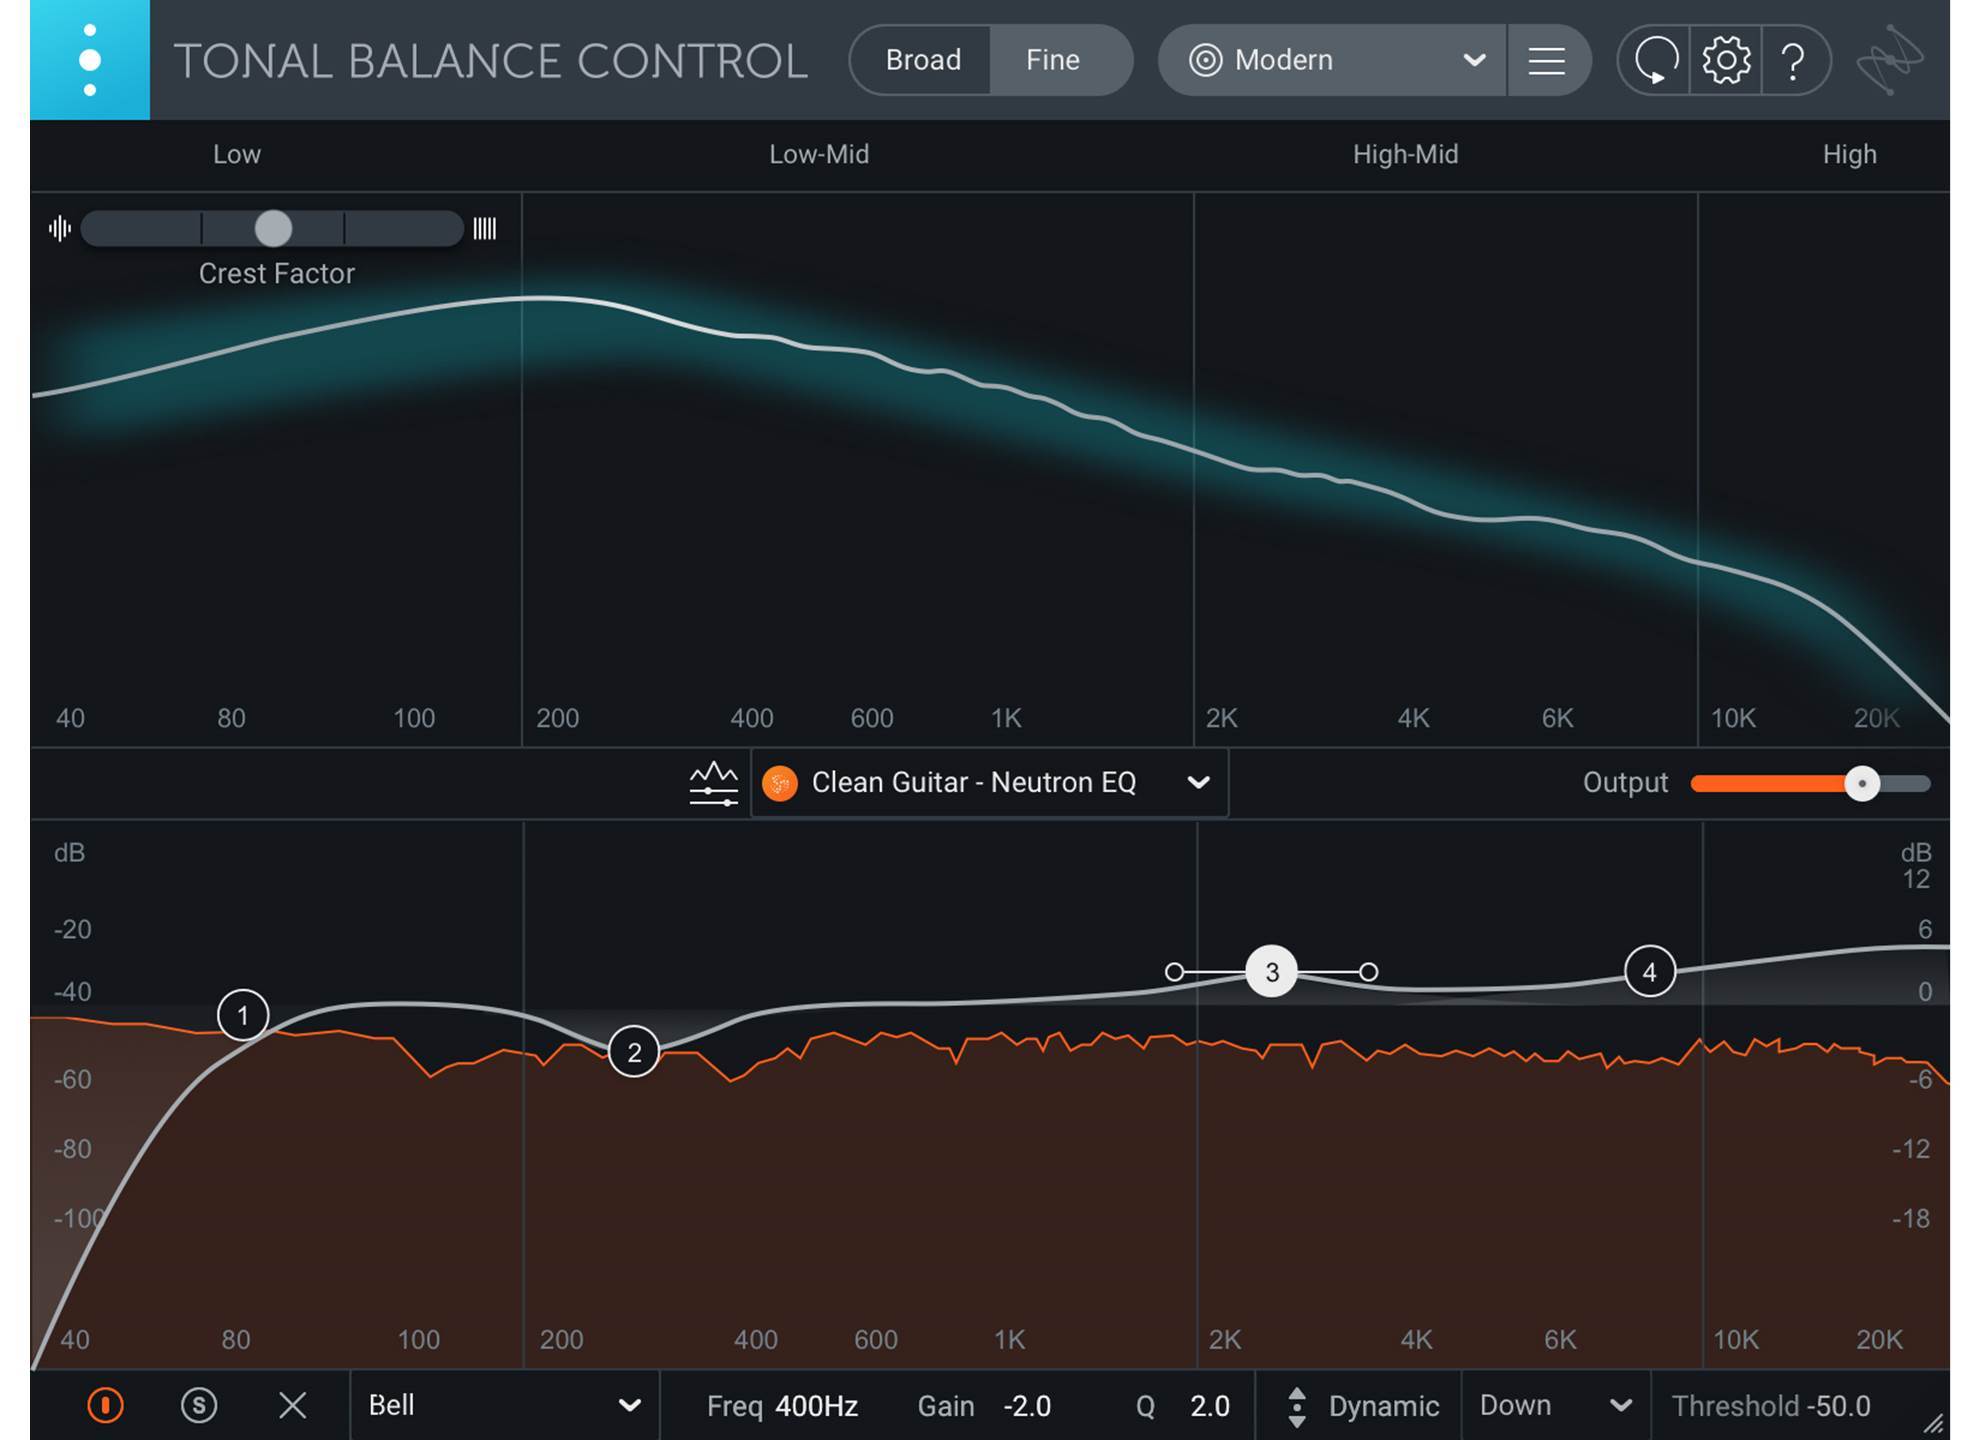 iZotope Tonal Balance Control 2.7.0 for ios download free